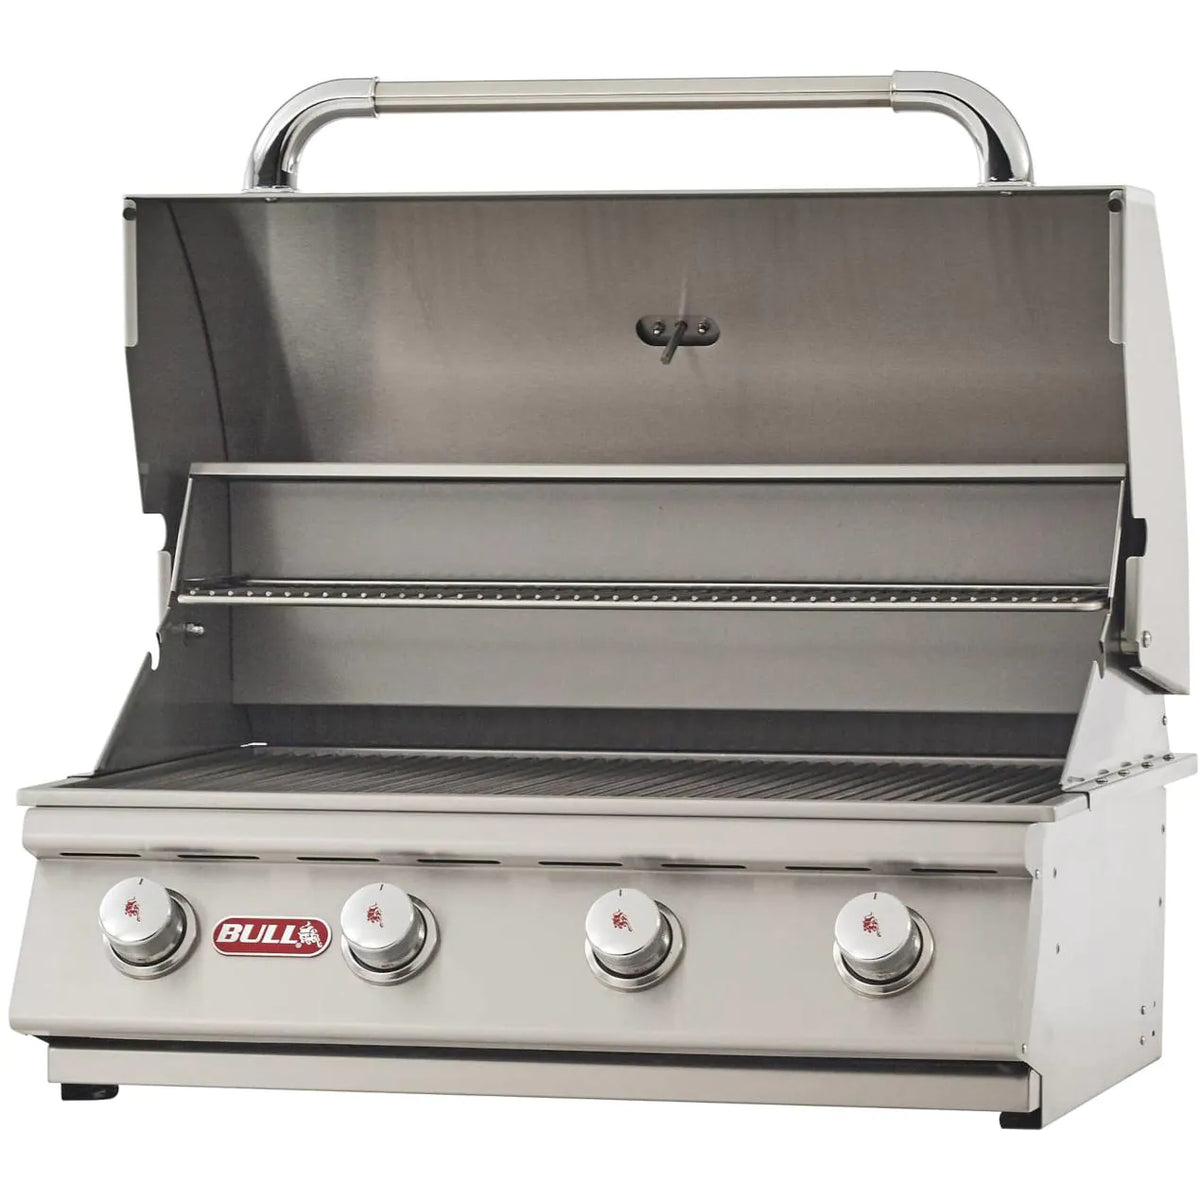 Bull 26038 Outlaw 4-Burner Built-In Gas Grill - Angled View With Hood Open